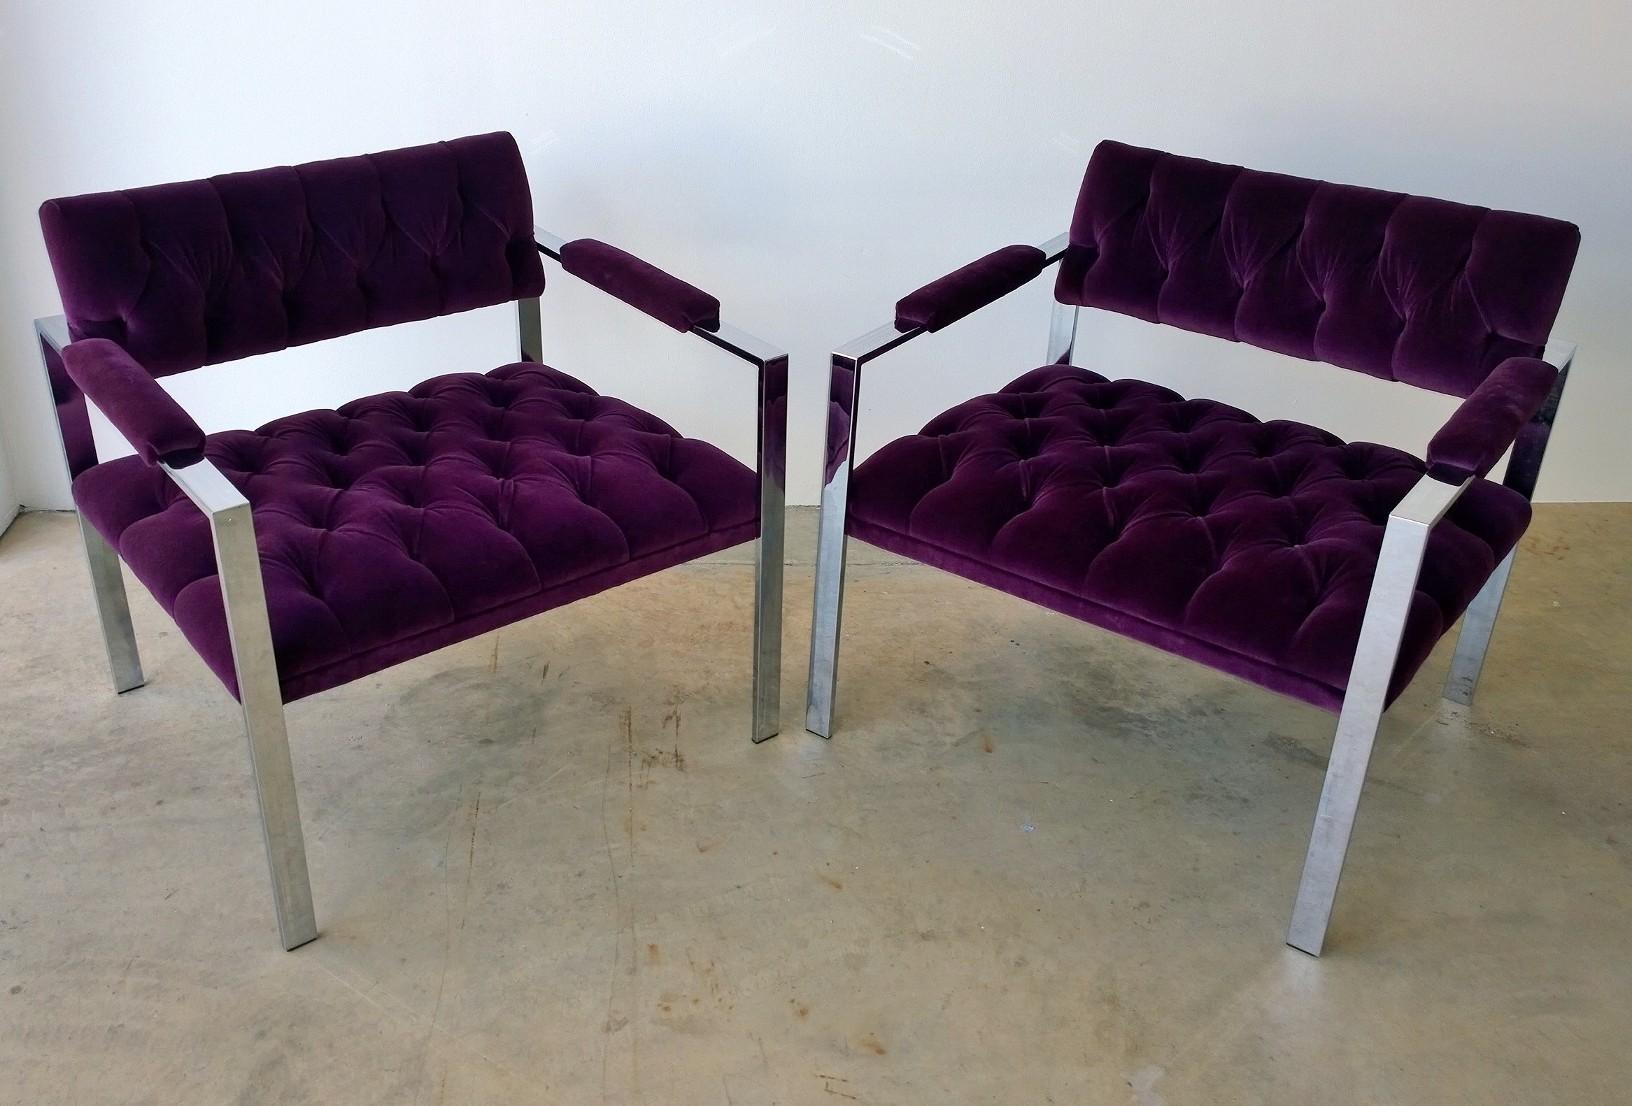 Offered is a pair of Mid-Century Modern Erwin-Lambeth arm or lounge chairs, beautifully button tufted in a brand new eggplant purple cotton velvet upholstery and finished off with a high sheen plated fame. This pair of Erwin-Lambeth arm or lounge